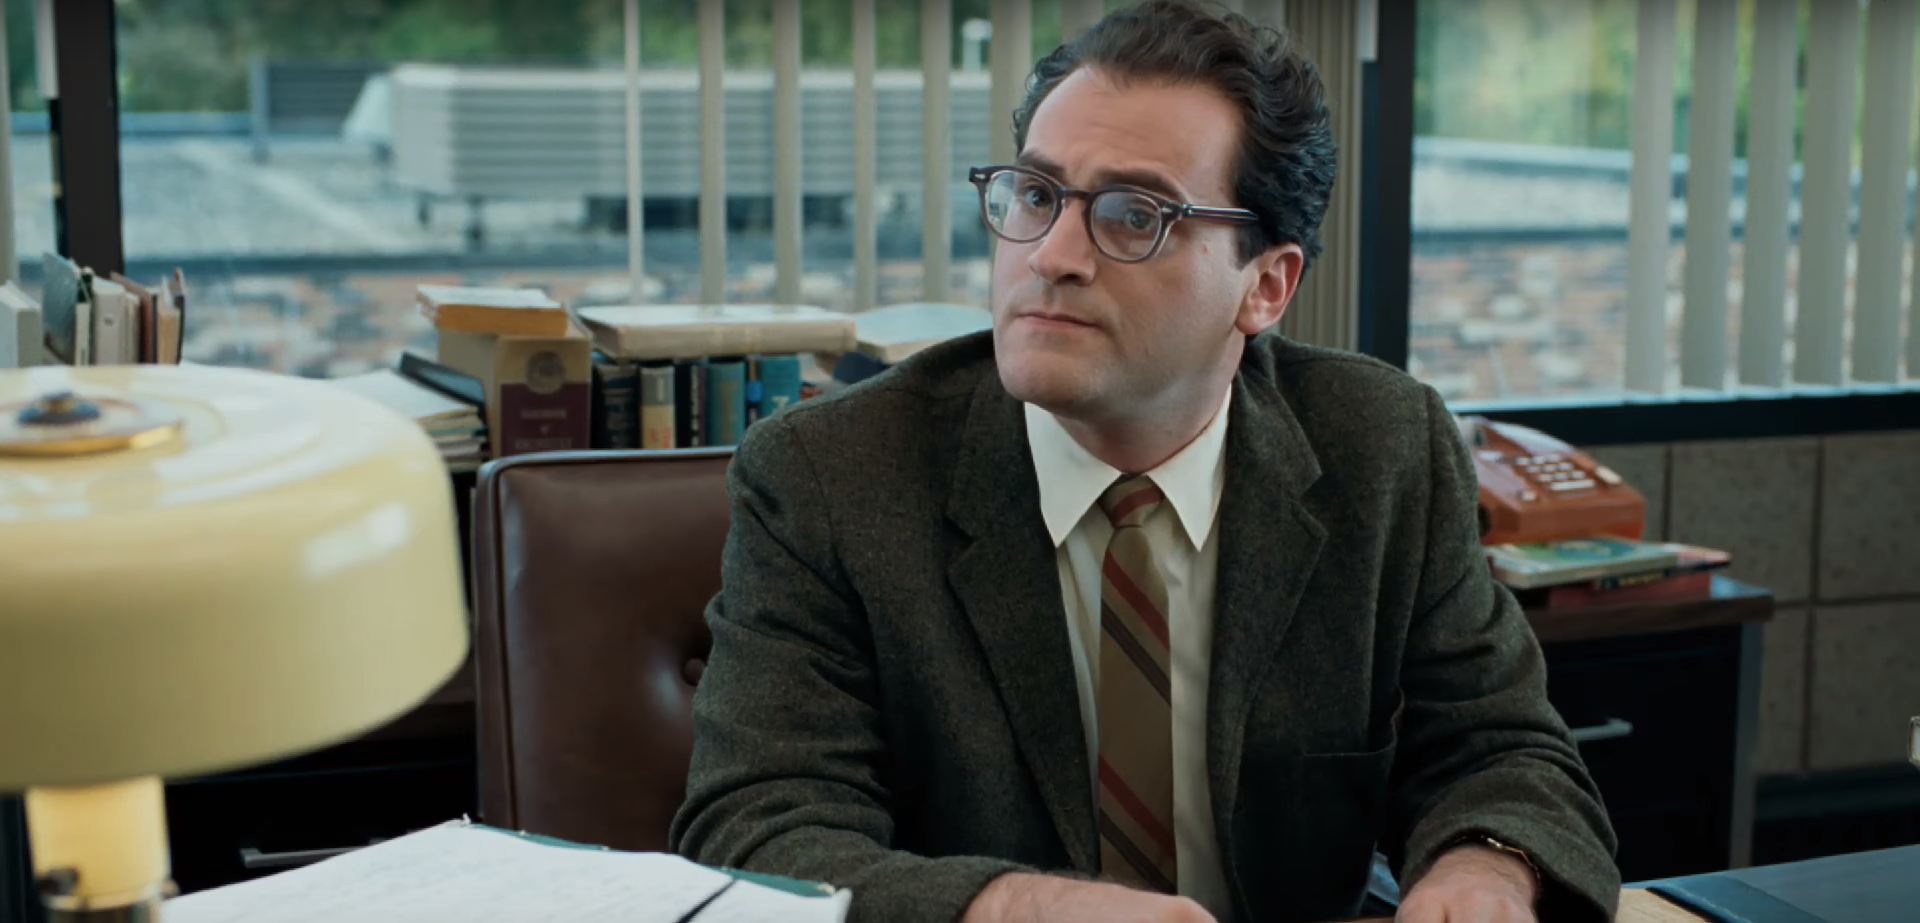 A decade on, real rabbis weigh in on Coen brothers' film 'A Serious Man' |  The Times of Israel